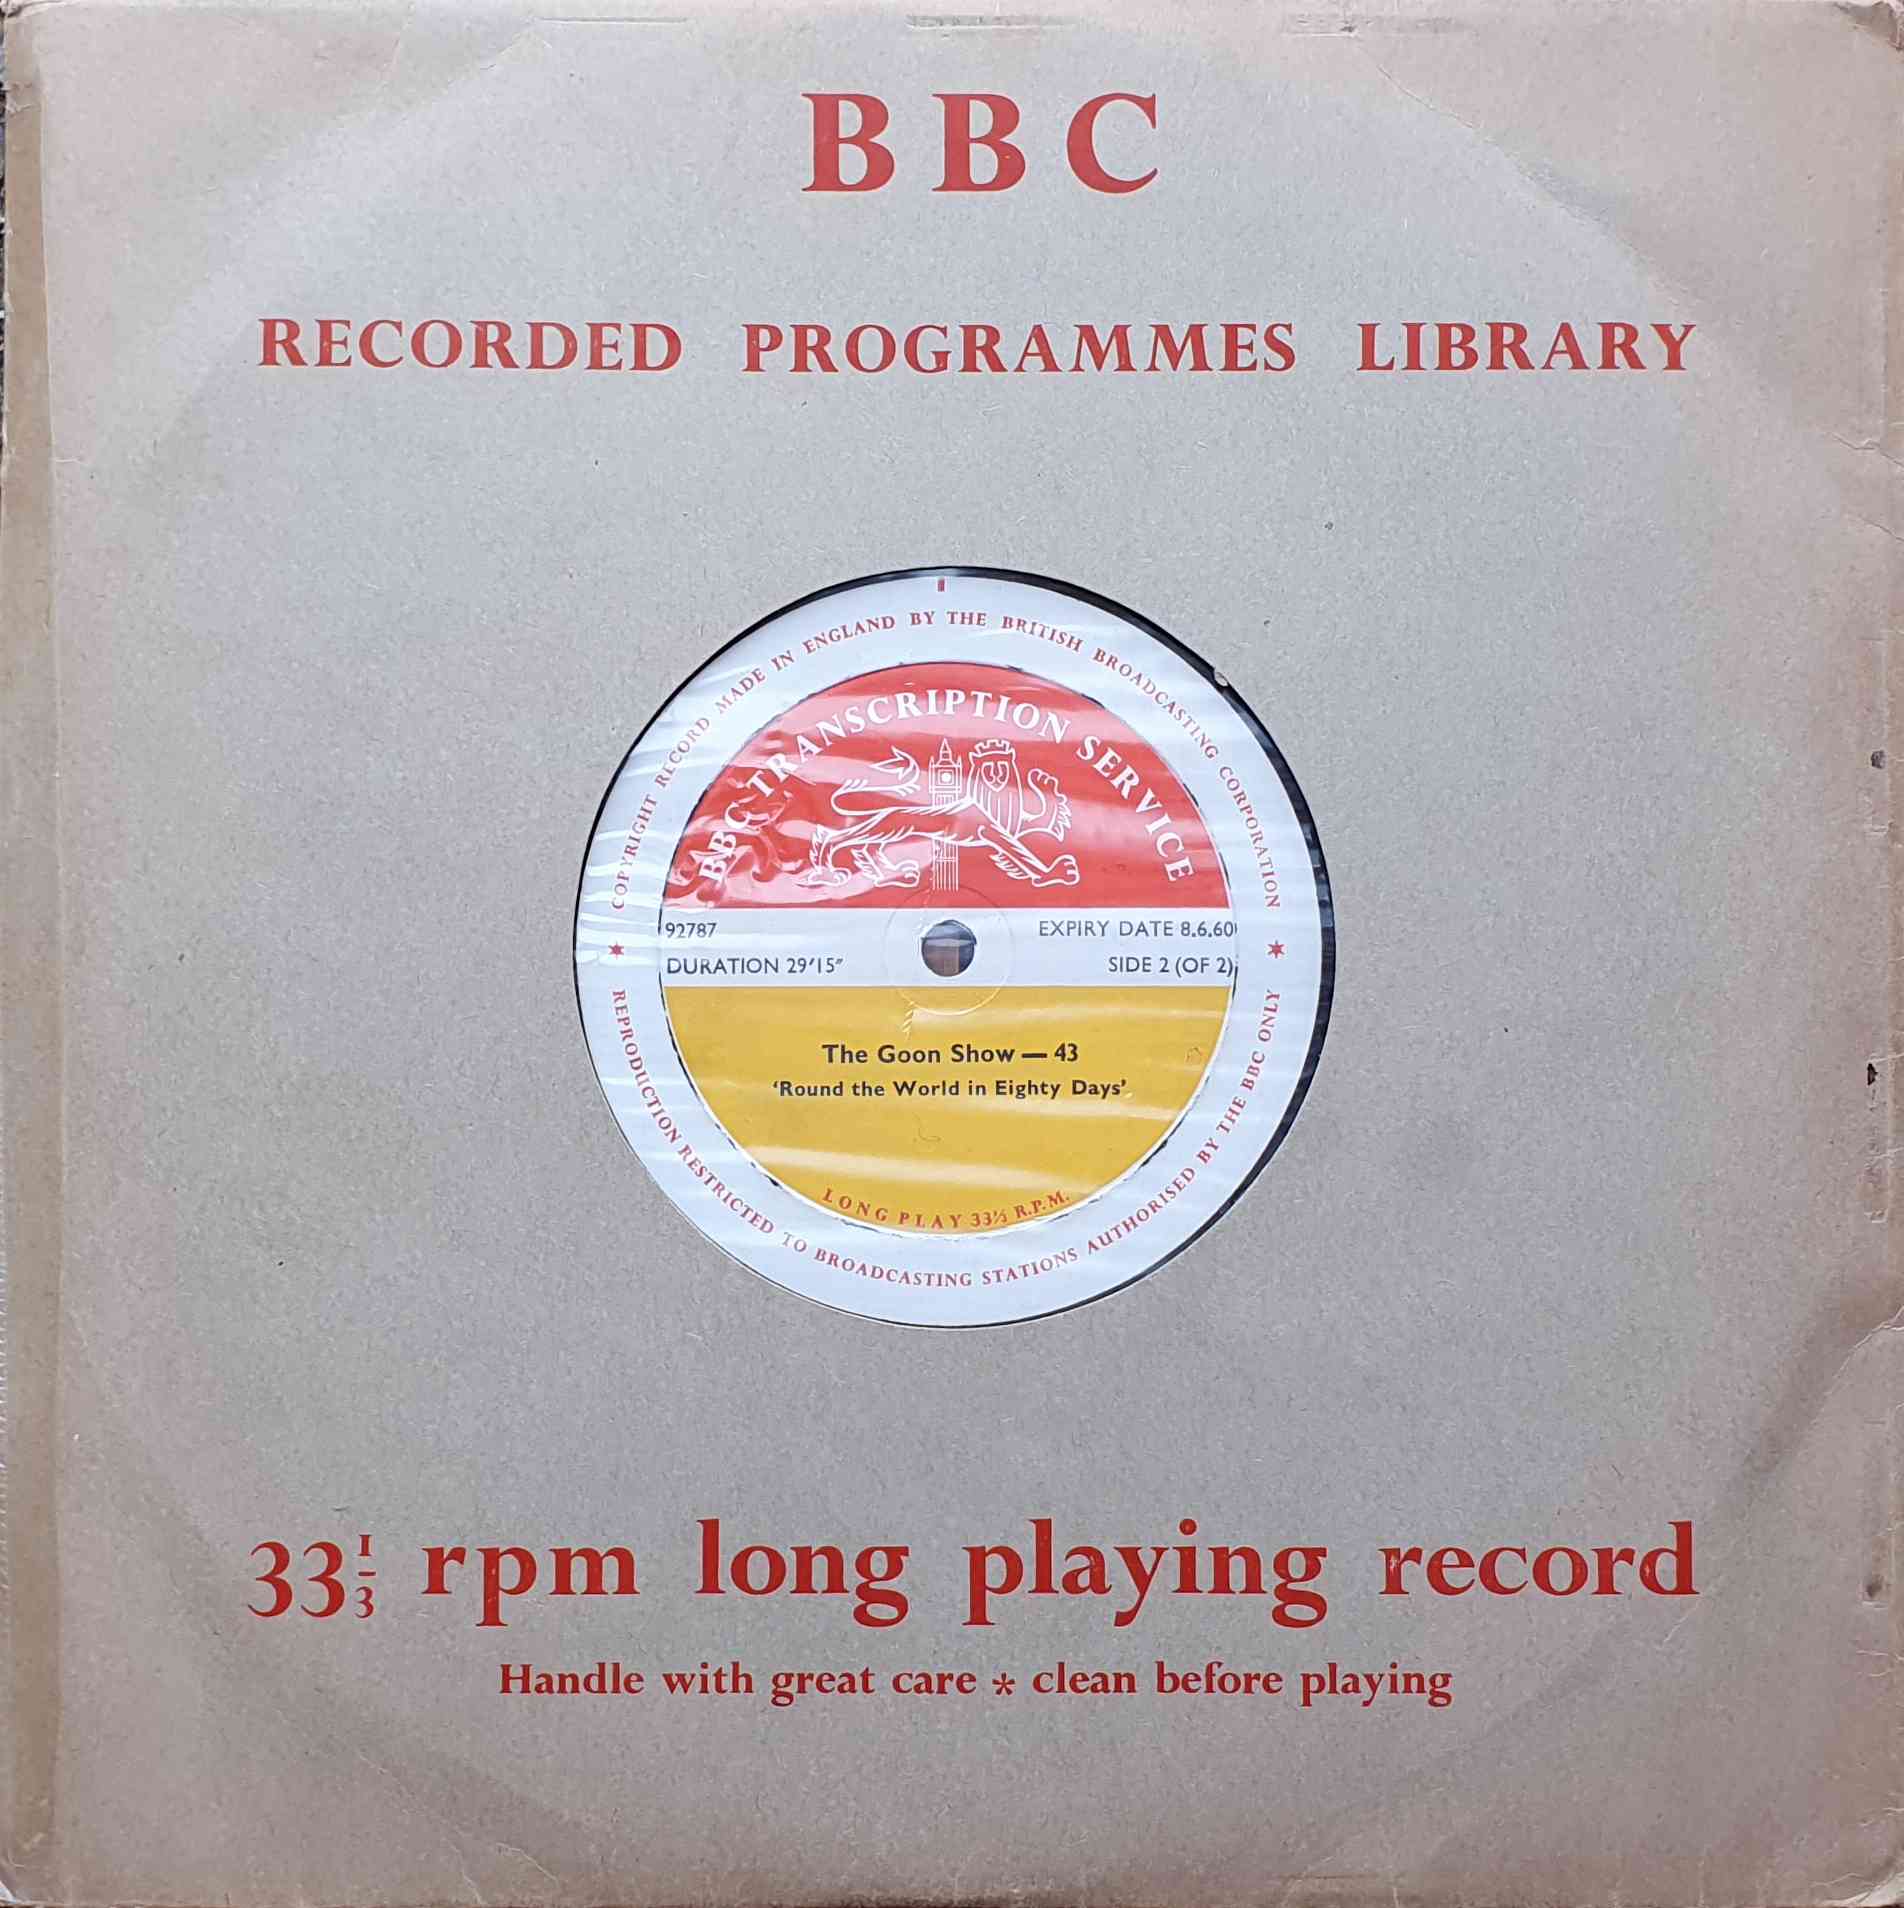 Picture of 92787 The Goon Show - 43 / 44 (Side 2 of 2) by artist Unknown from the BBC 10inches - Records and Tapes library